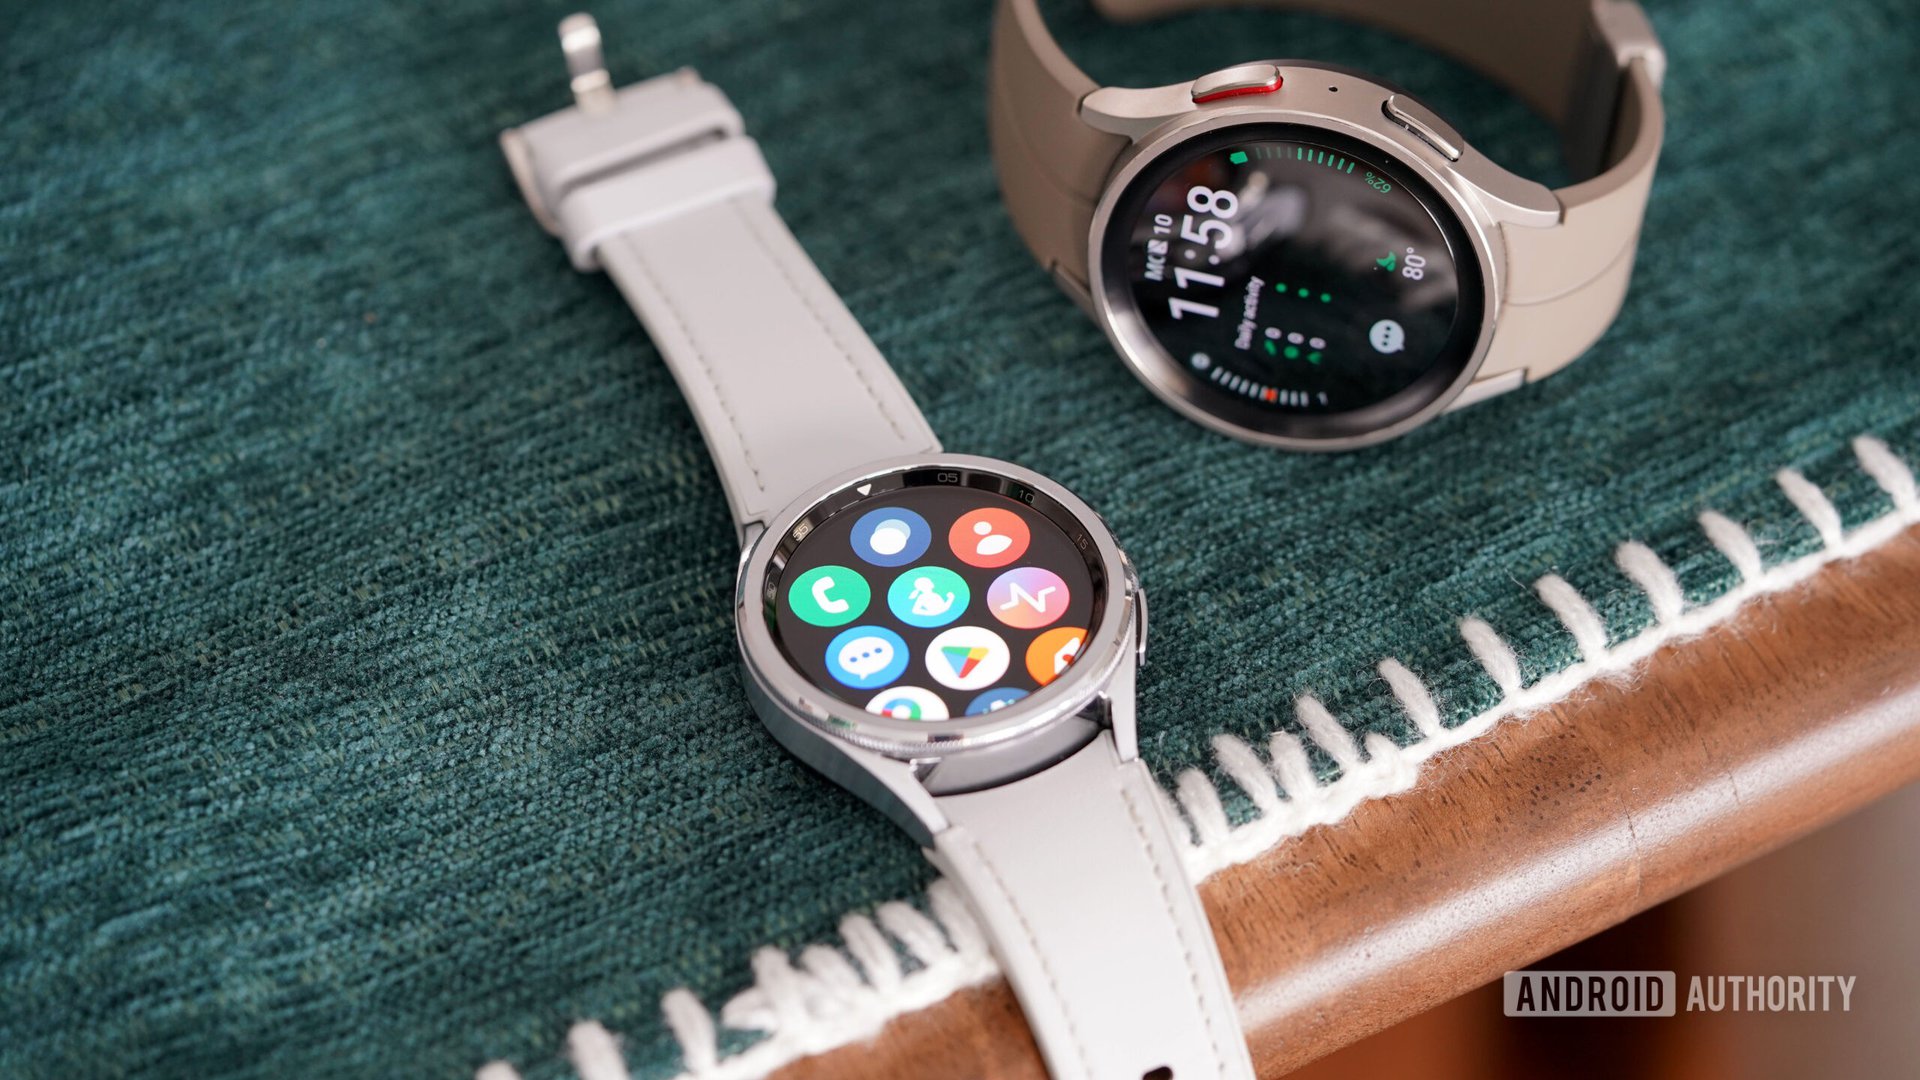 Samsung simply bumped up the trade-in values for actually outdated Galaxy Watches